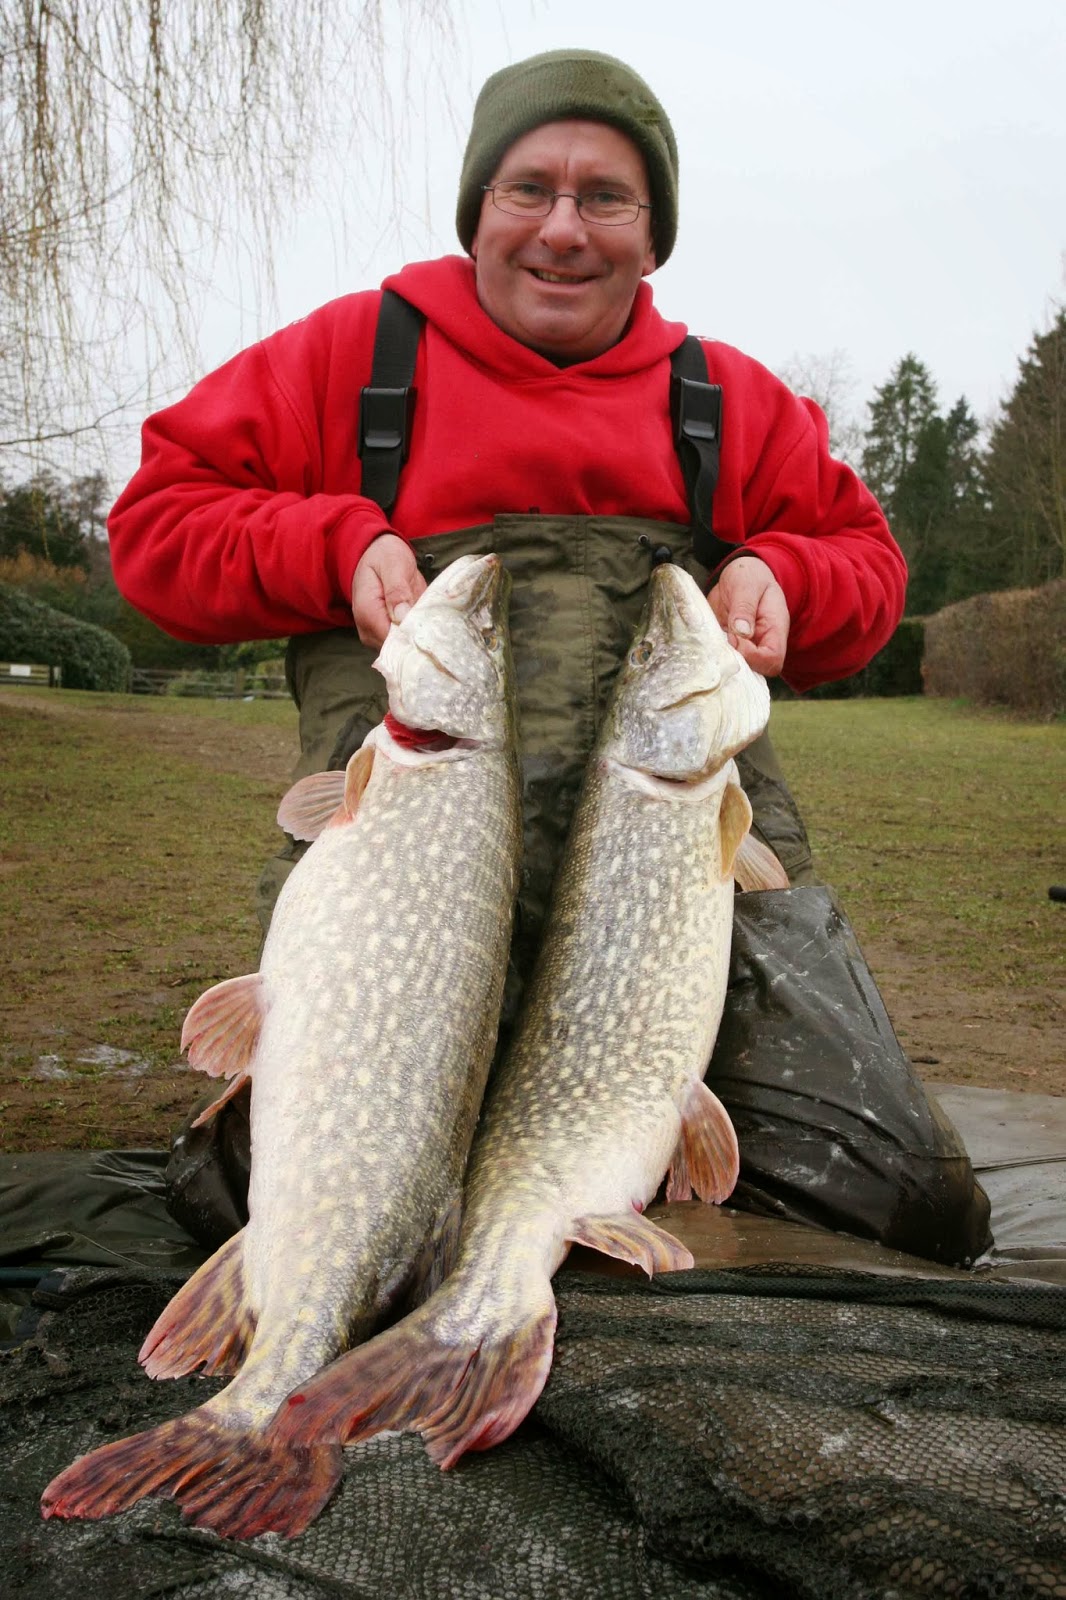 Duncan Charmans World of Angling: Single Hooks and pre-baiting -The way  forward for Pike.